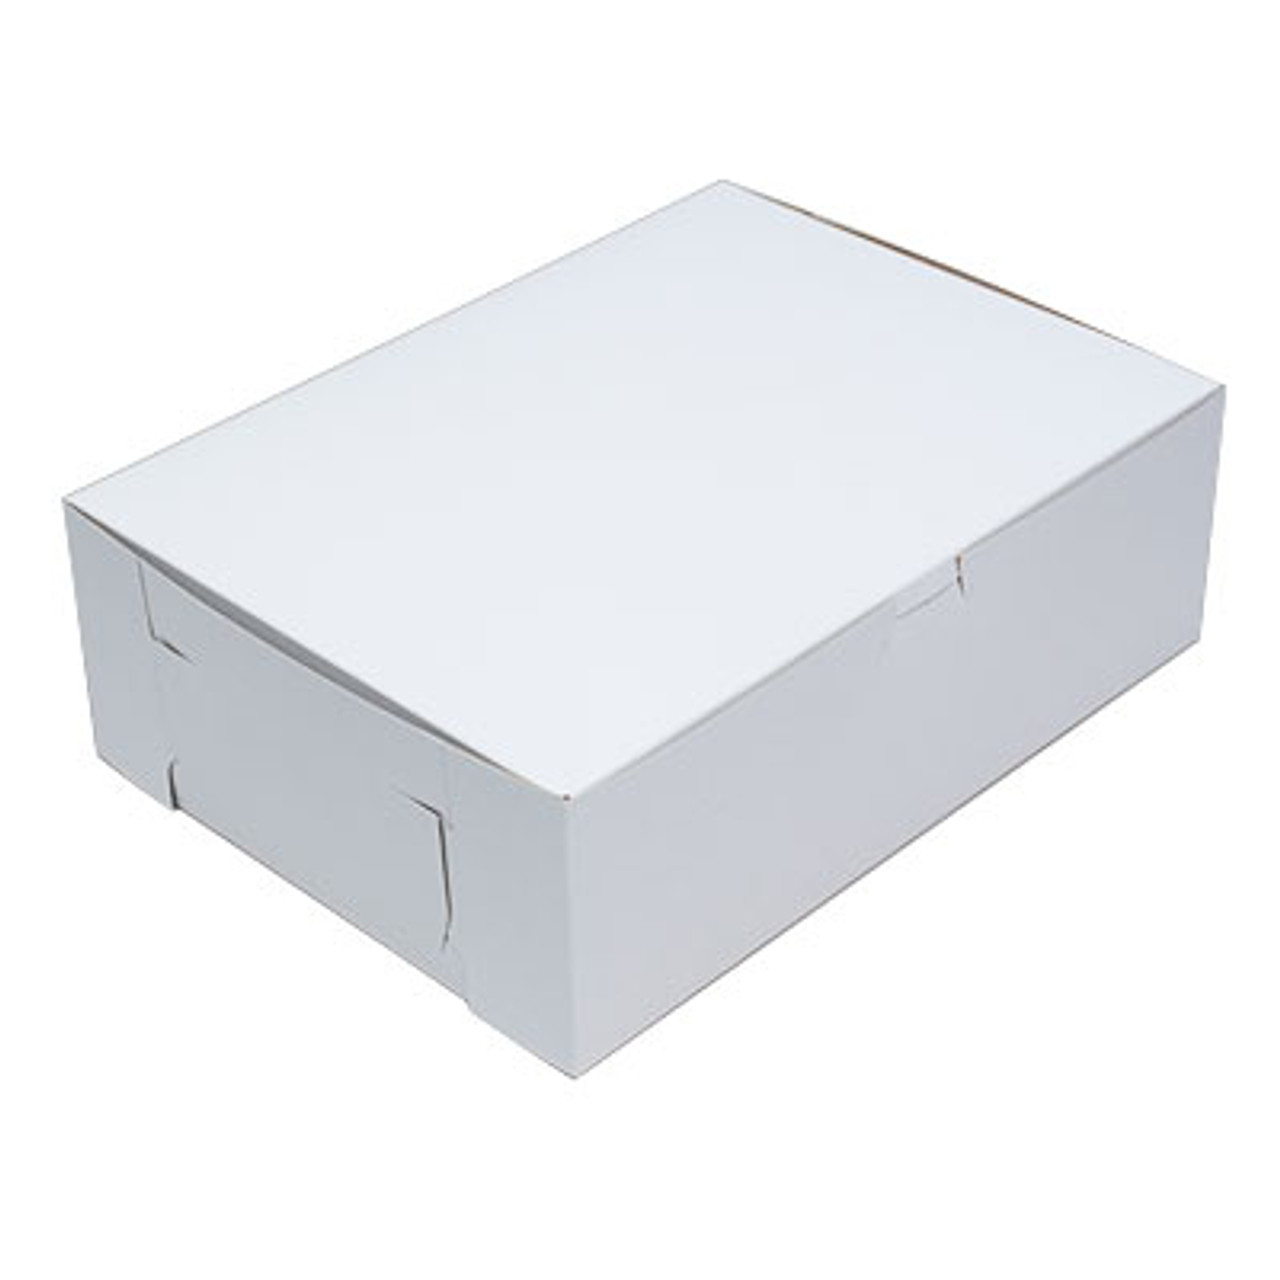 14-1/2" x 10" x 4-1/2" White Cupcake Bakery Box to fit 12 Regular Cup/24 Mini Cup Size per 100